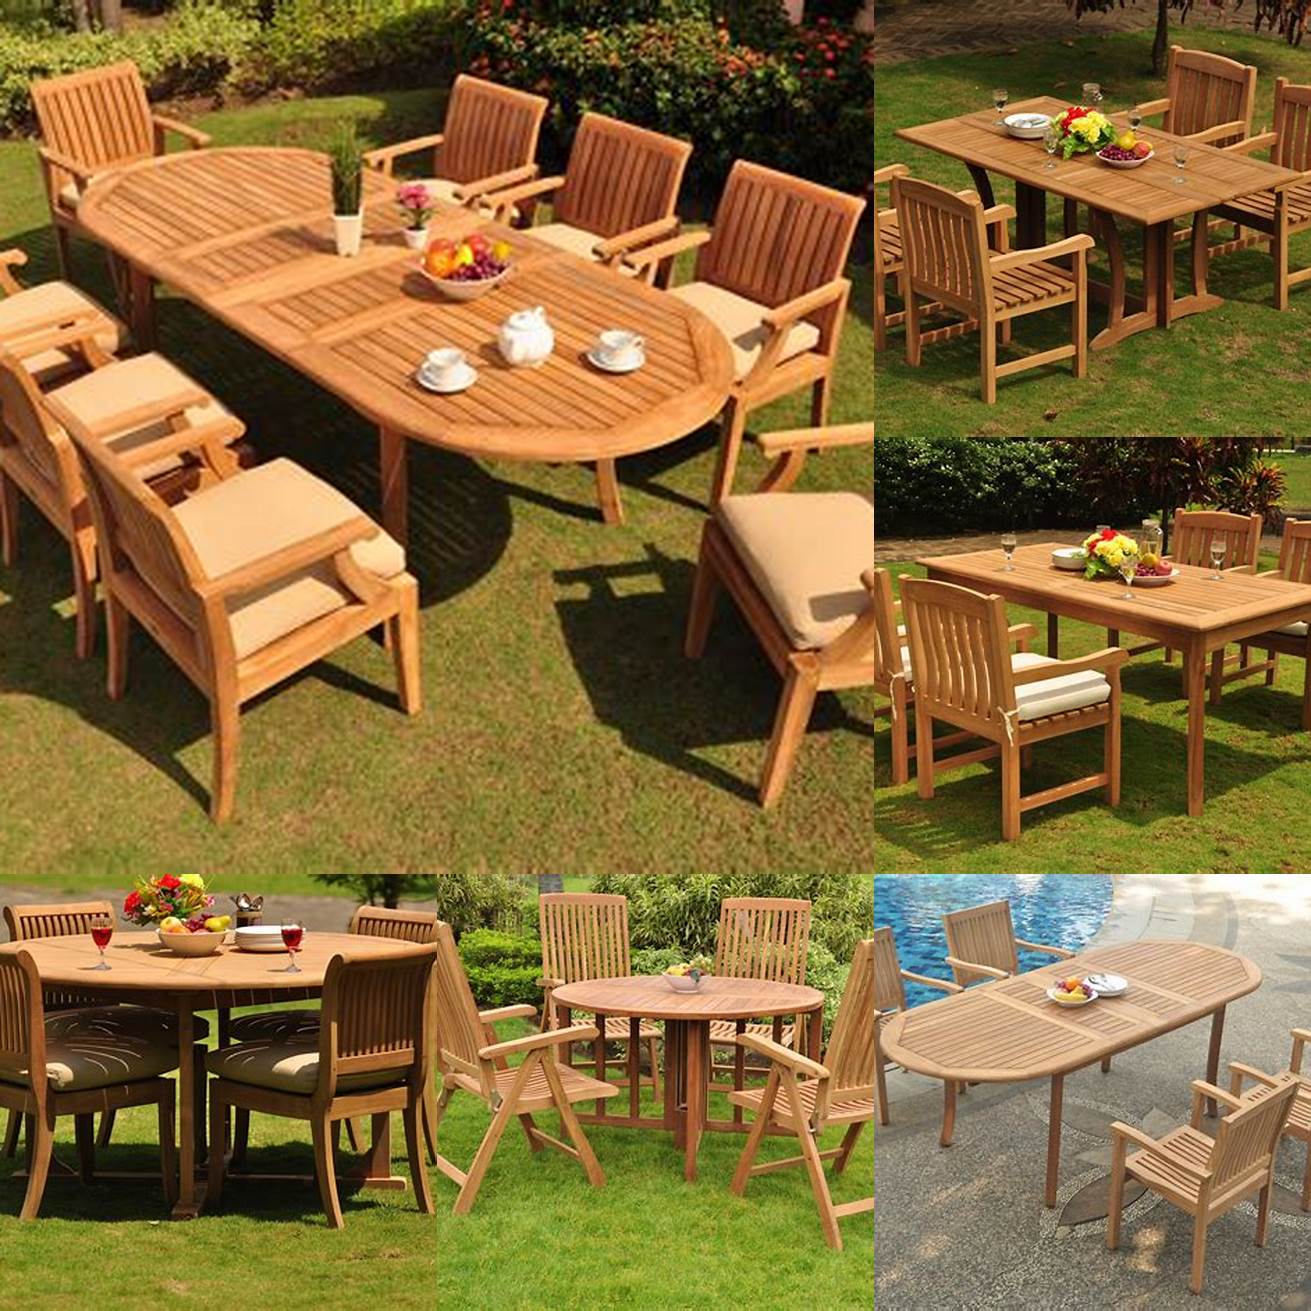 Teak Patio Table with Chairs